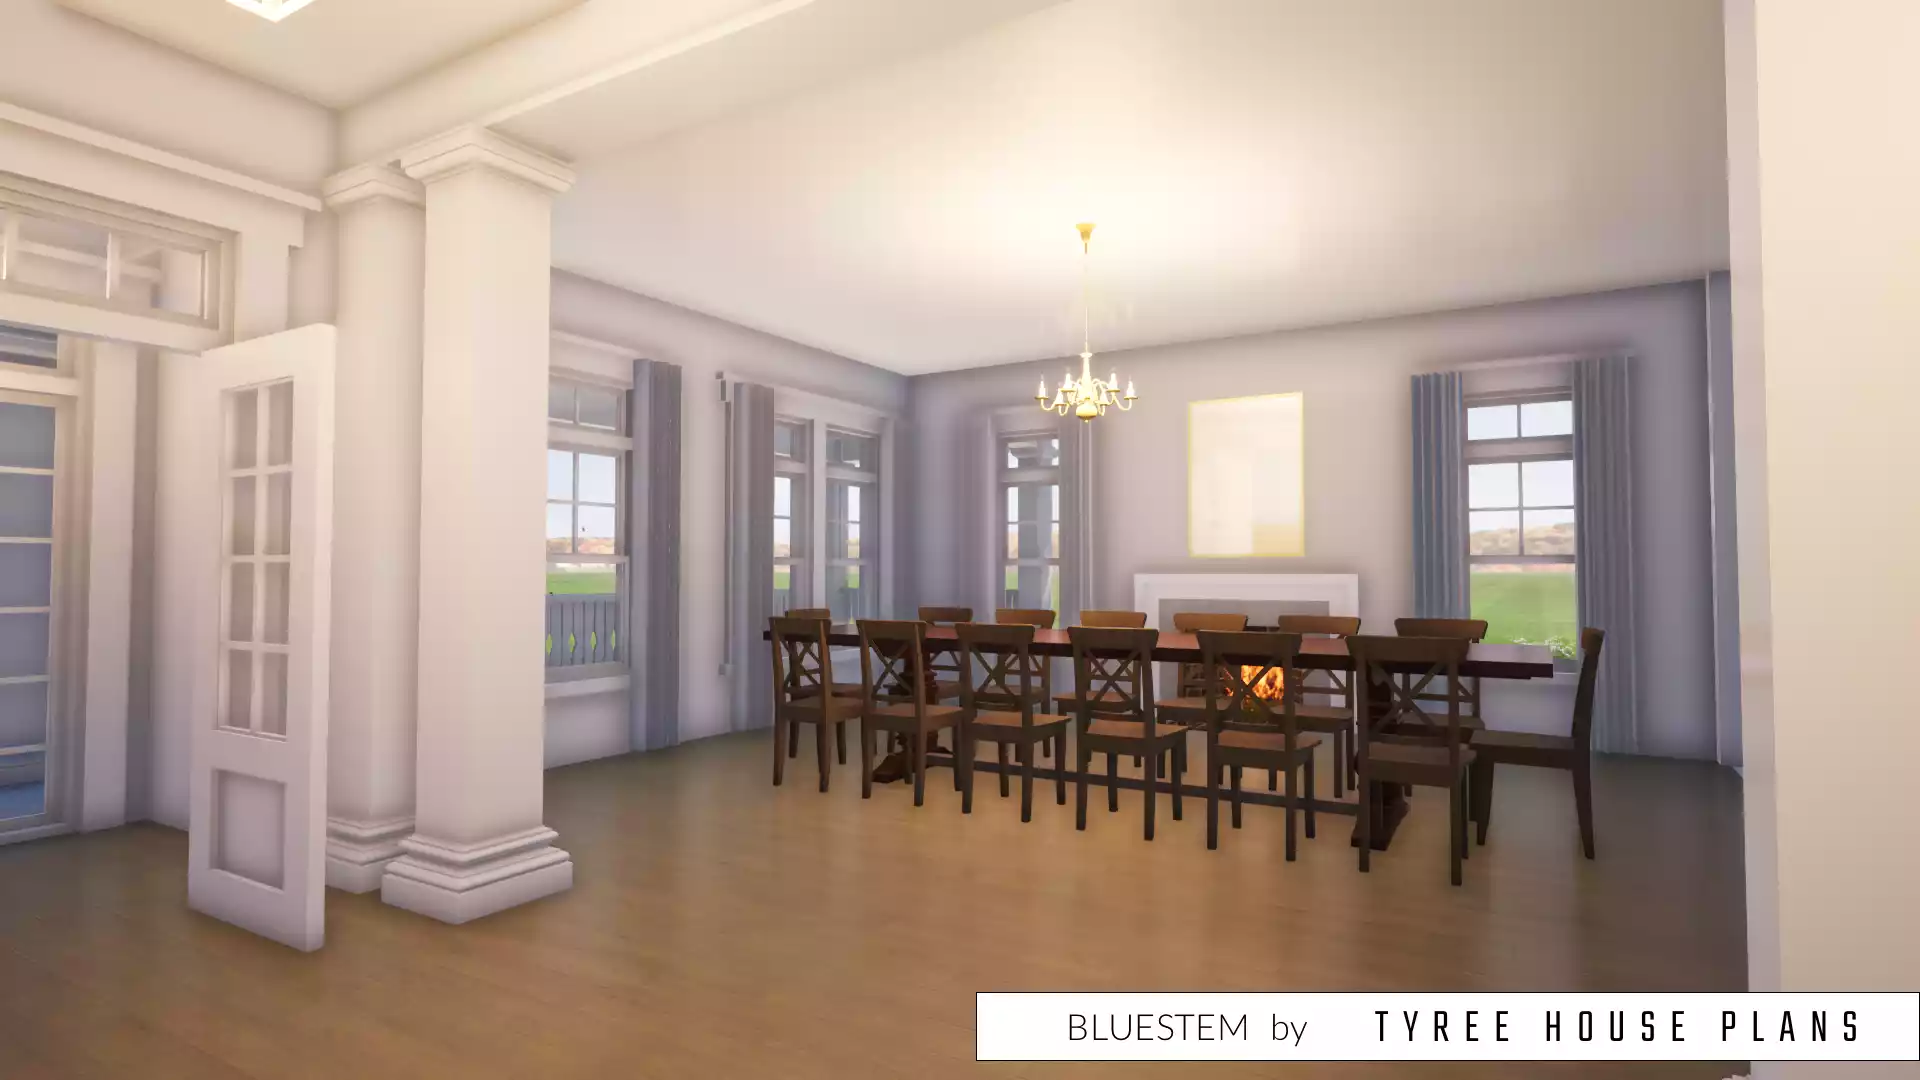 Formal dining room with fireplace. Bluestem by Tyree House Plans.